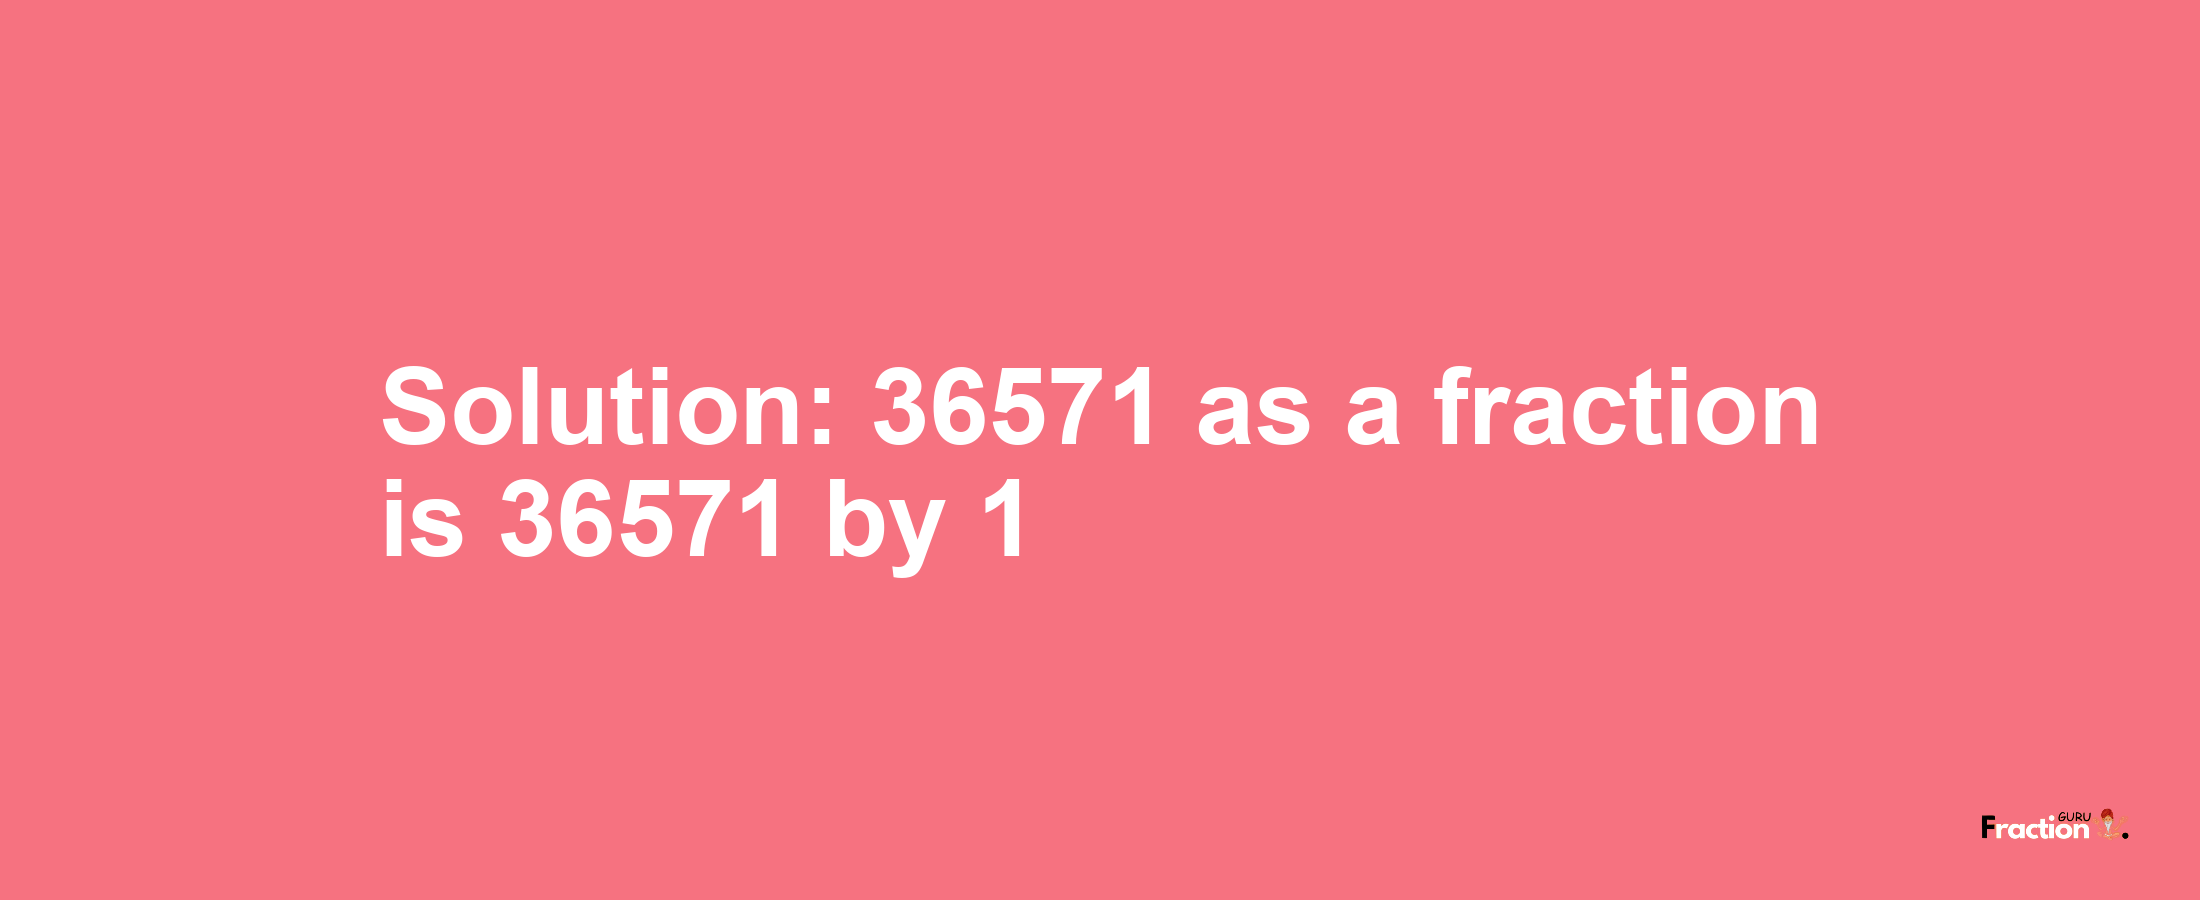 Solution:36571 as a fraction is 36571/1